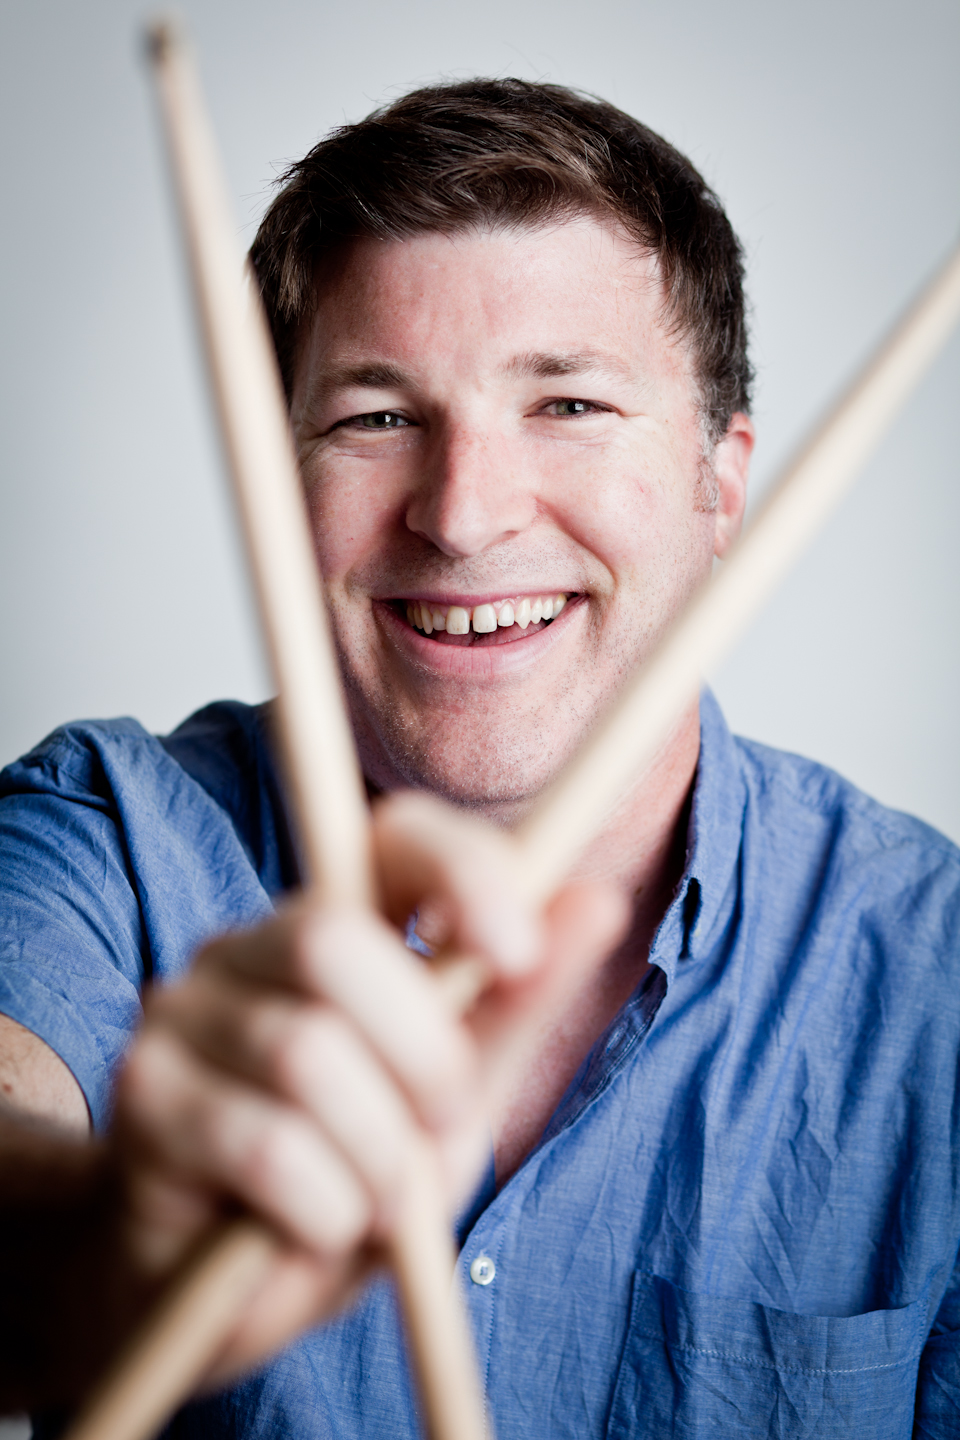 Our Old Drummer Ian Mc Tigue From Riverdance And MAriah Carey\'s Band